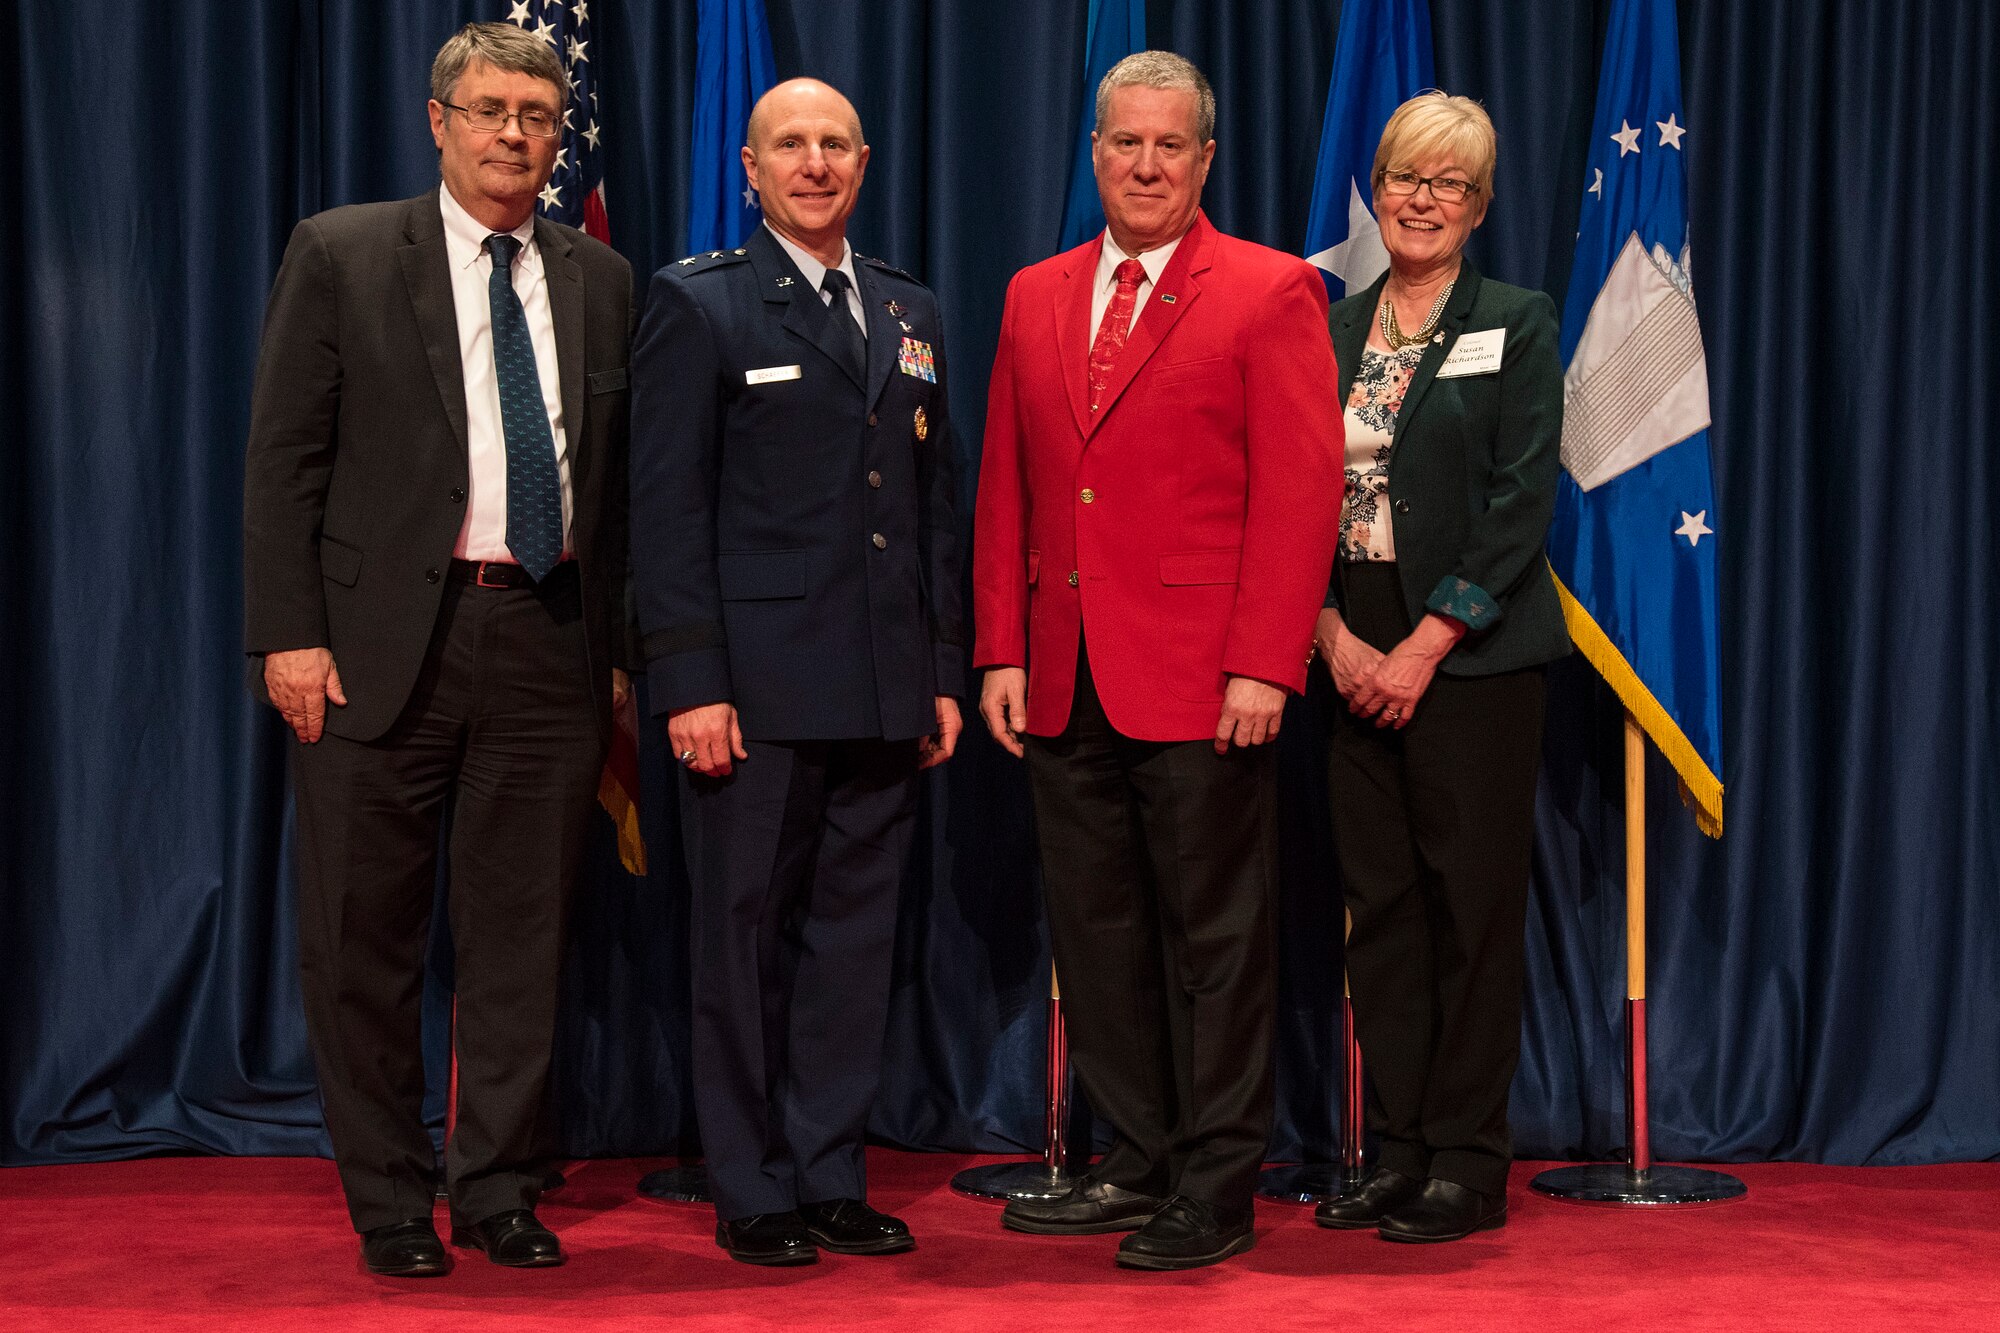 DAYTON, Ohio – David Hills (red jacket) received the 2018 Director’s Award for Volunteer of the Year for his dedication and excellence in serving the National Museum of the U.S. Air Force. (from left to right) Museum Director David Tillotson III, Maj. Gen. Carl E. Schaefer Deputy Commander, Air Force Materiel Command, Volunteer David Hills, and Air Force Museum Foundation Board of Trustees President Col.(Ret.) Susan E. Richardson. (U.S. Air Force photo)